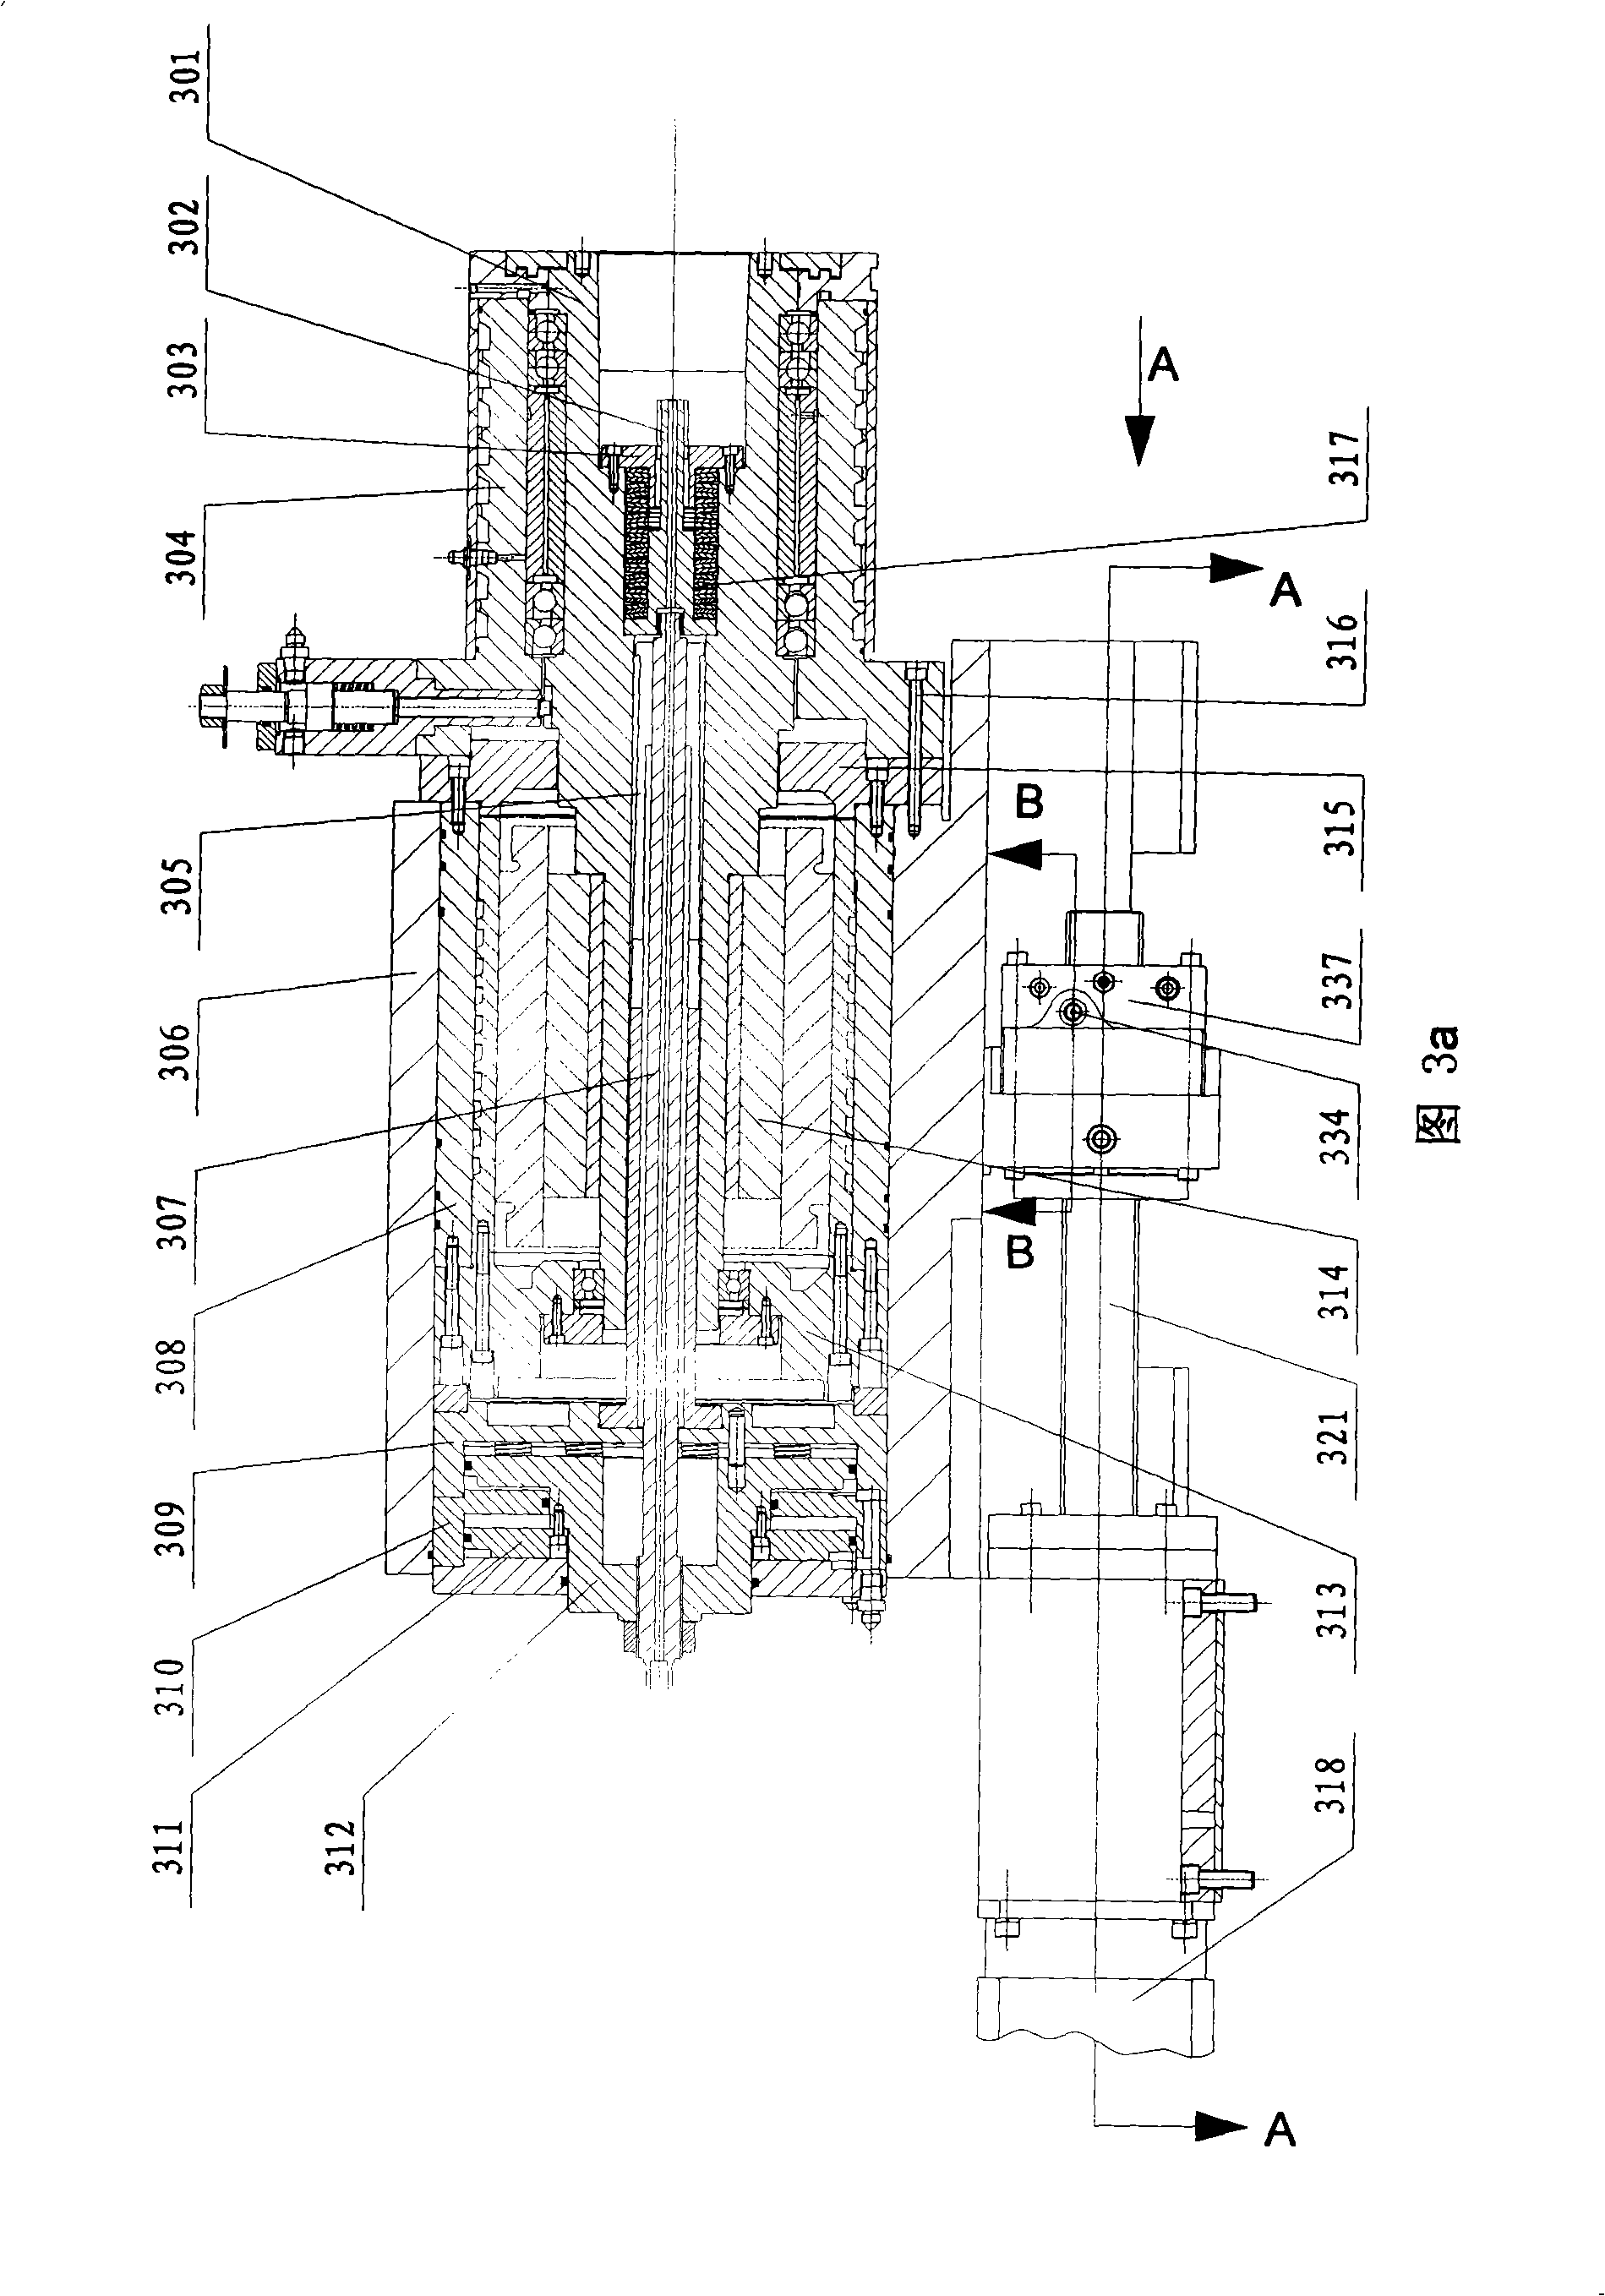 Numerical control machine for lapping spiral bevel gear